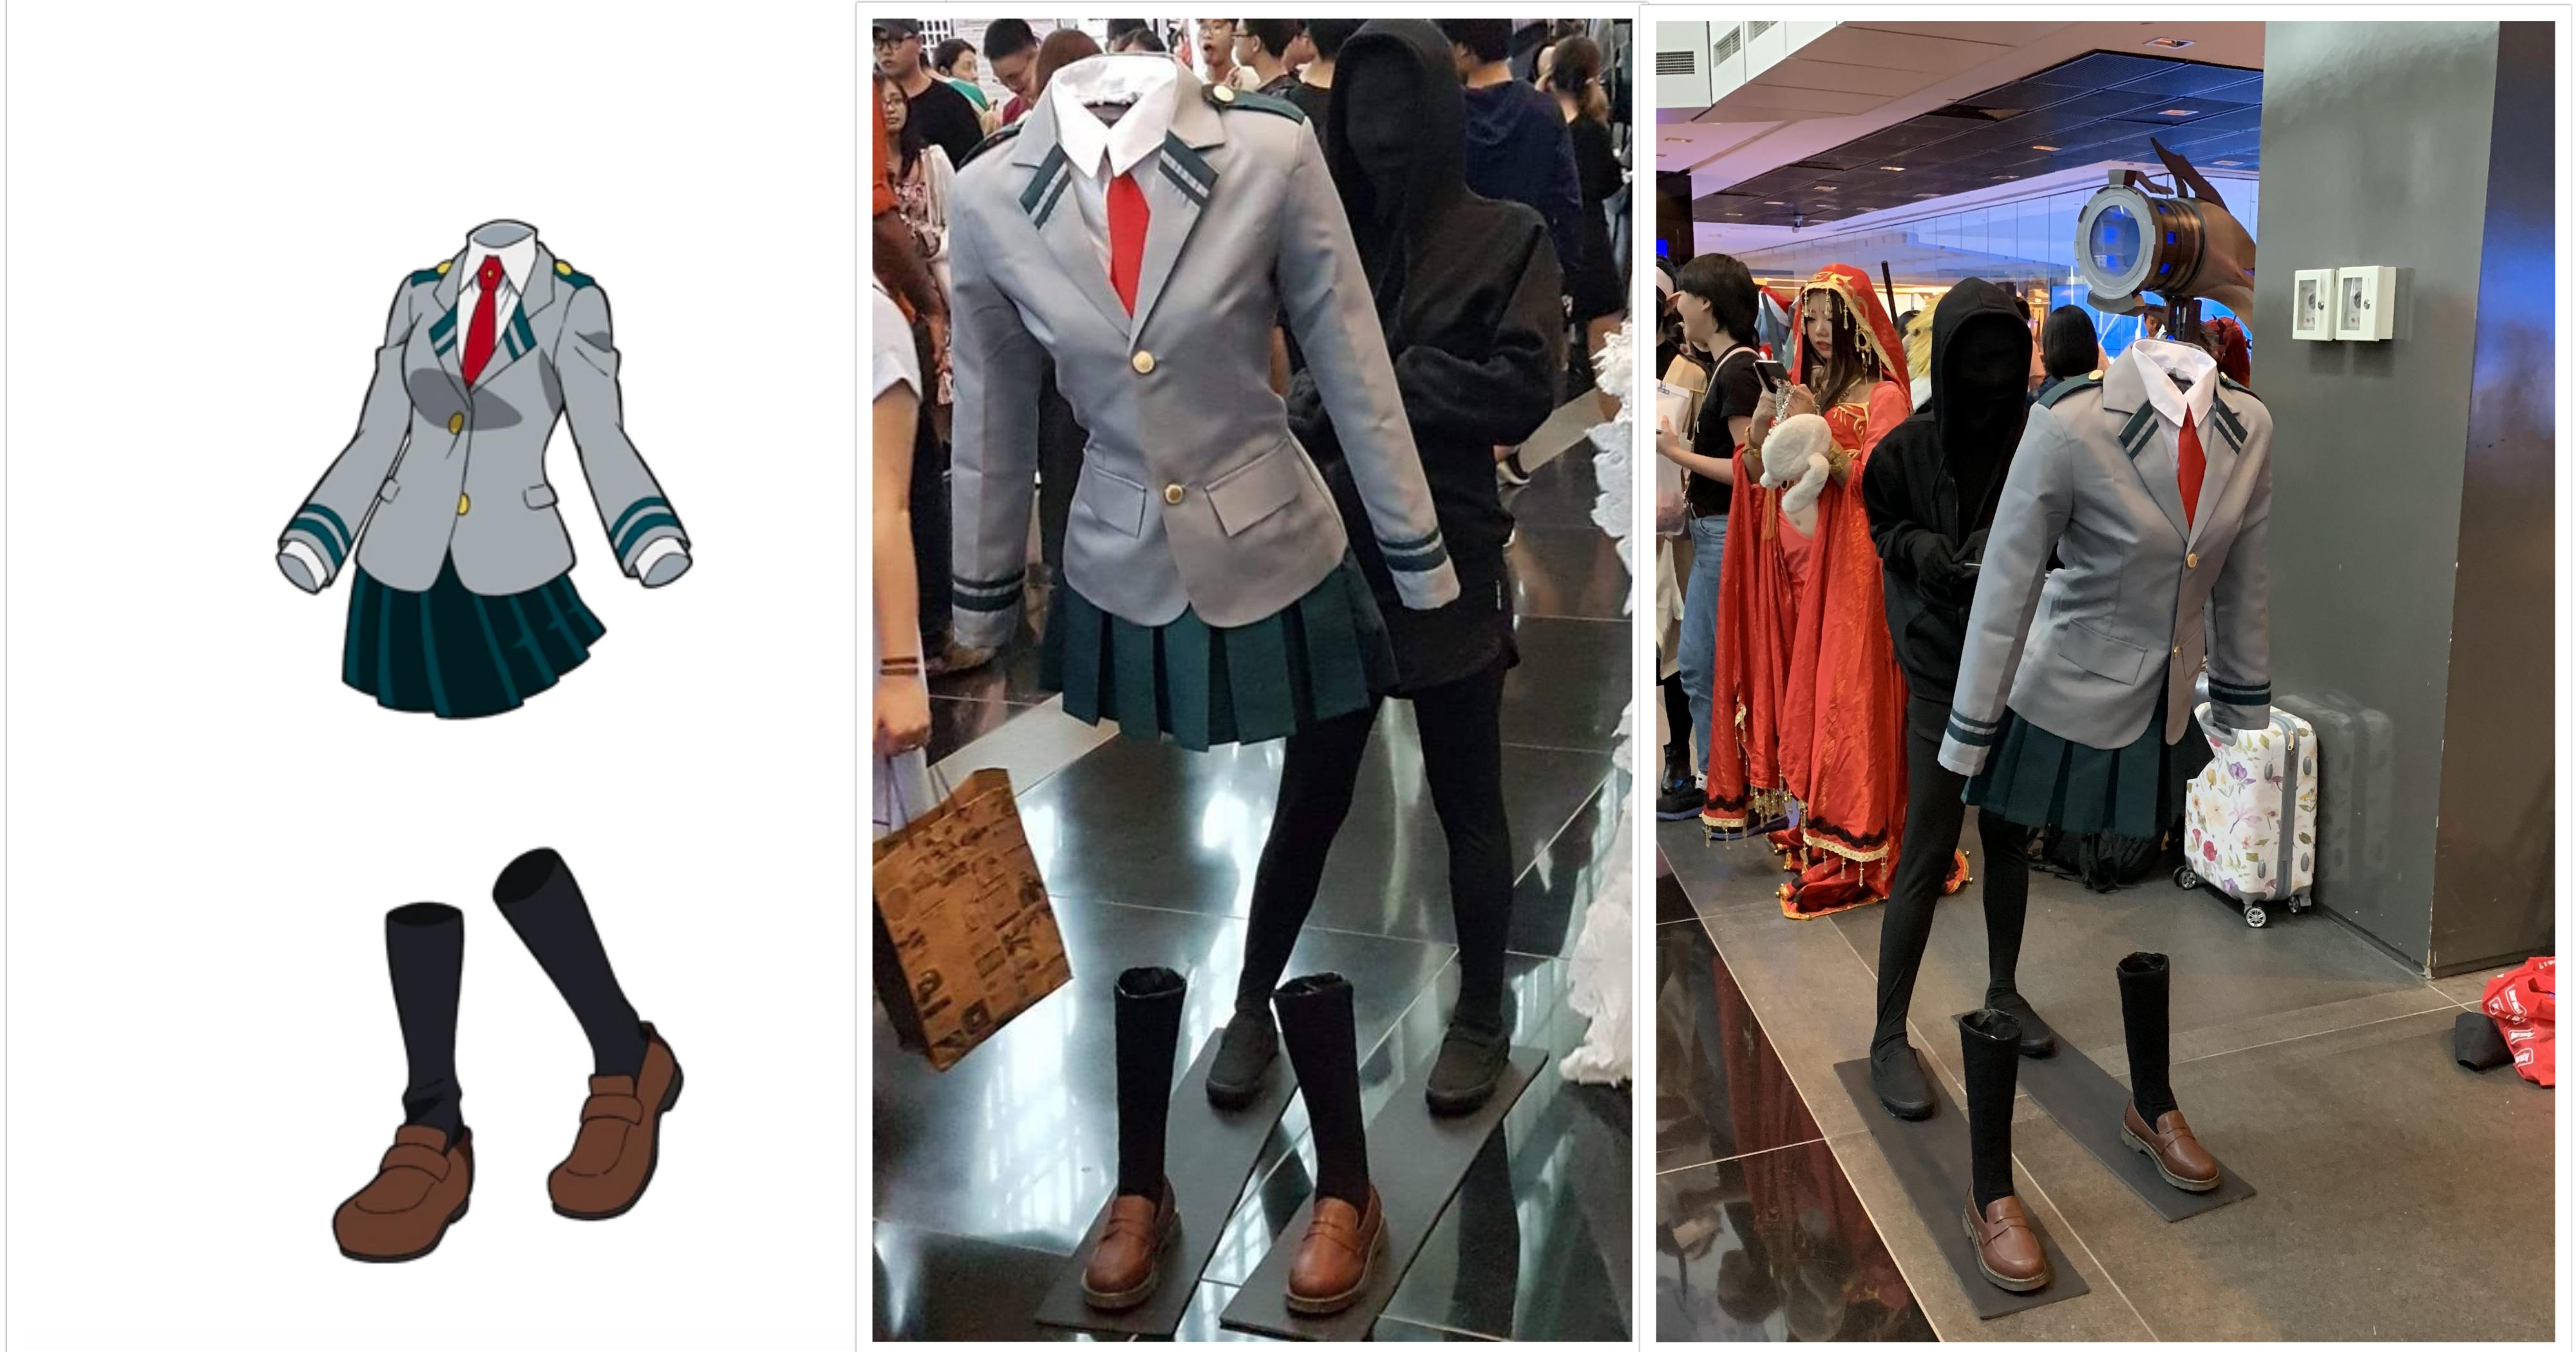 S'pore cosplayer absolutely nails My Hero Academia costume, goes viral  worldwide  - News from Singapore, Asia and around the world